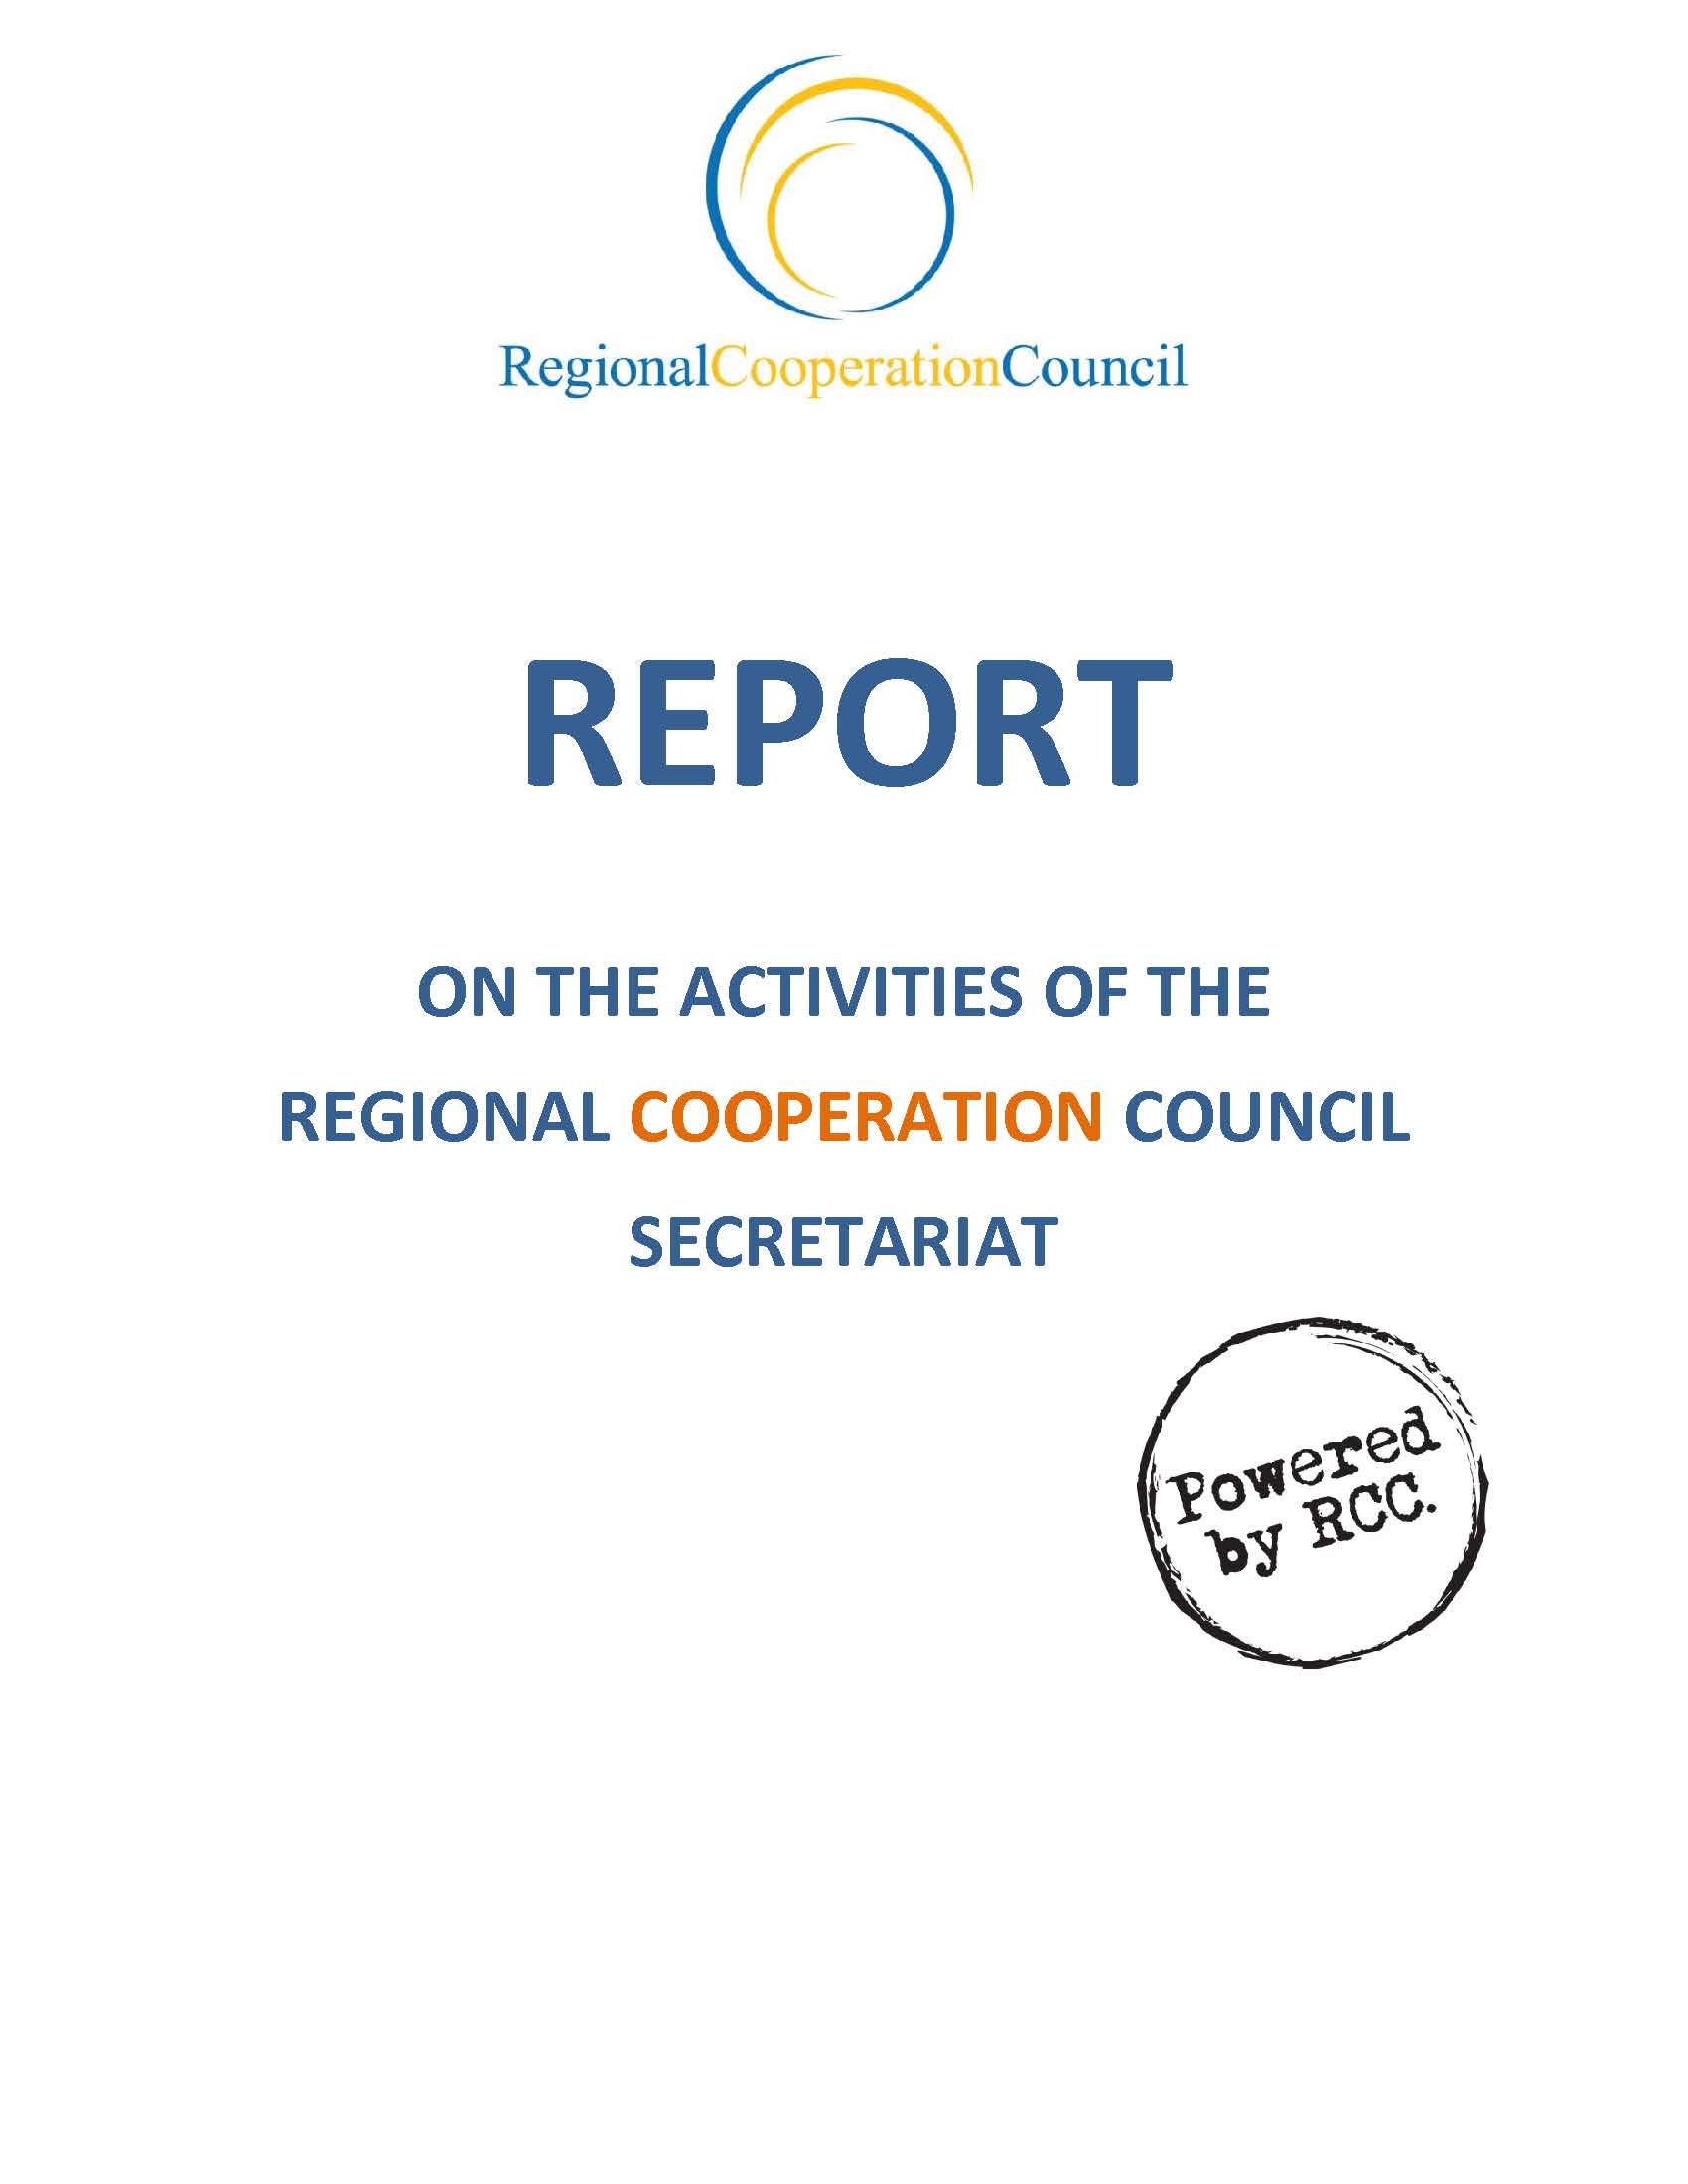 REPORT ON THE ACTIVITIES OF THE REGIONAL COOPERATION COUNCIL SECRETARIAT FOR THE PERIOD 1 April – 31 August 2017 